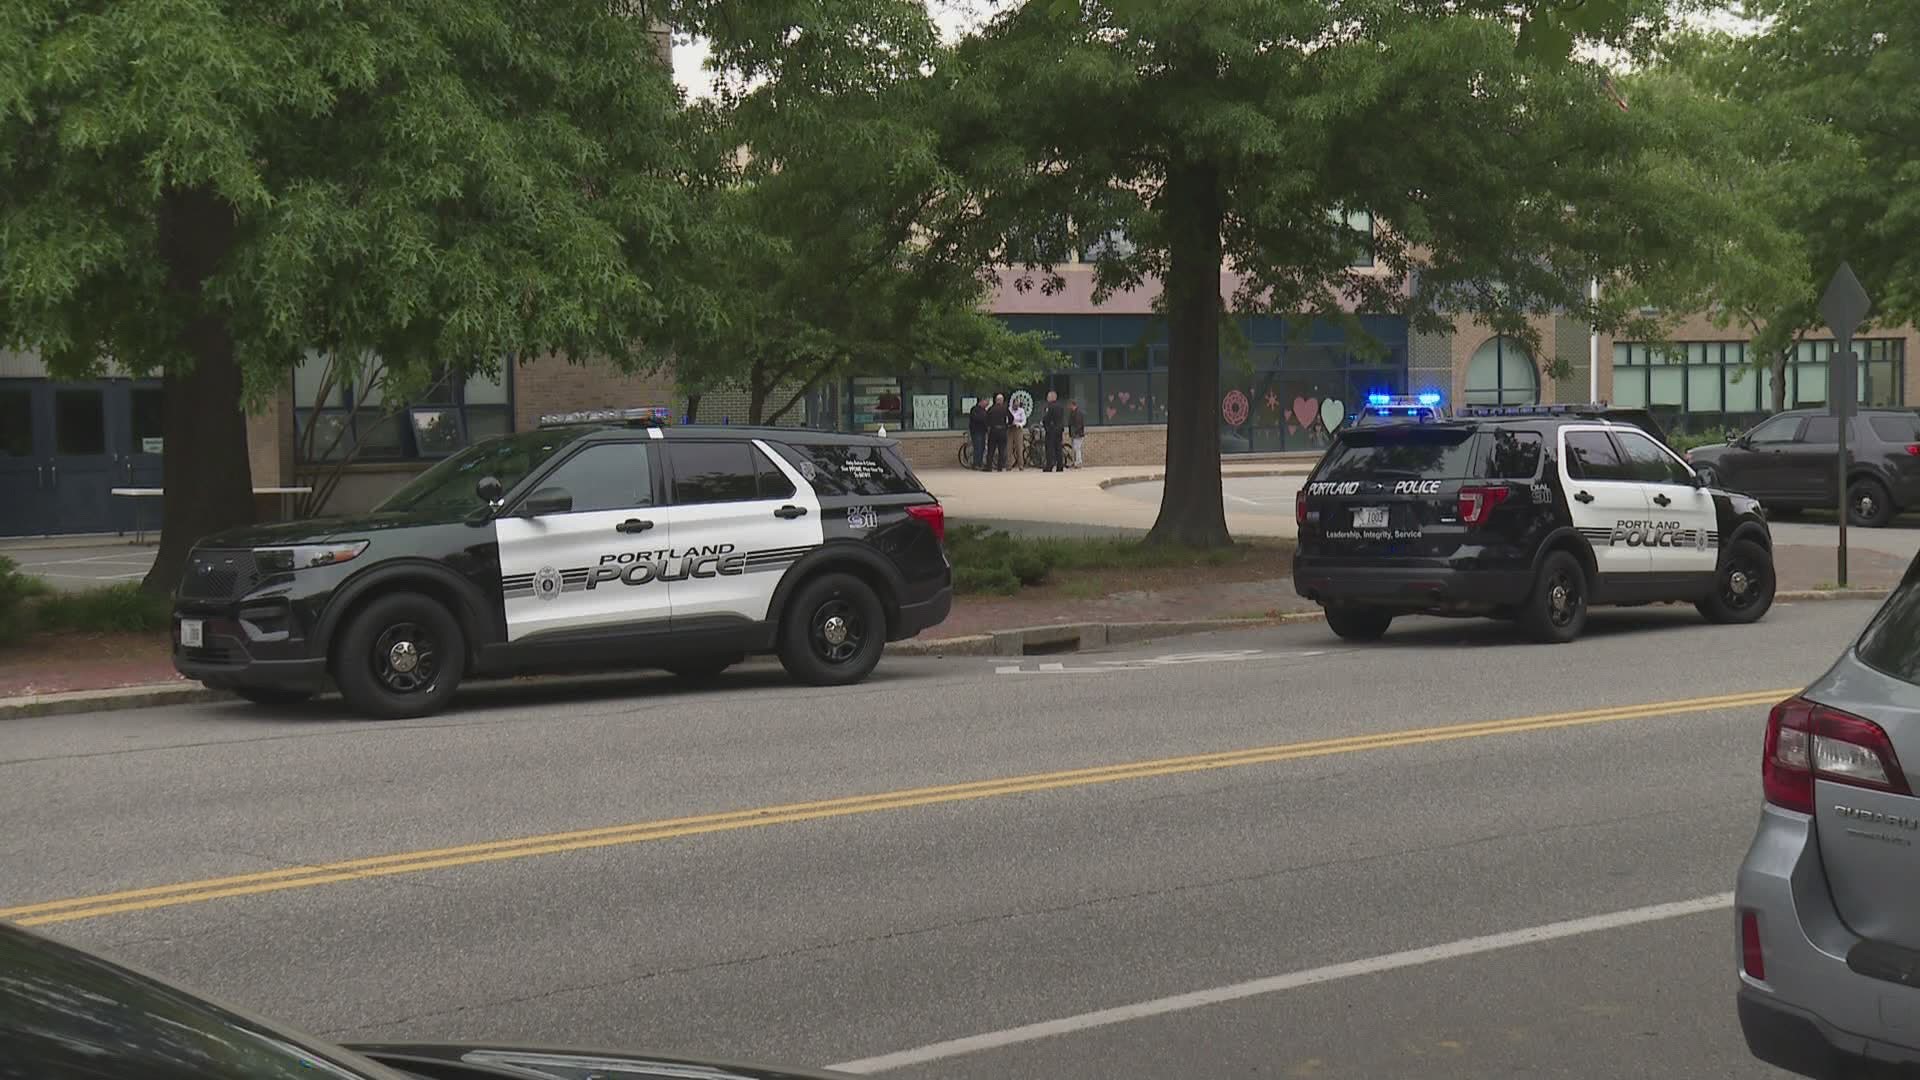 Officers fully searched the school and found no indication of an active threat.  The district lifted the lock down at 10:45 this morning.  No one was hurt.